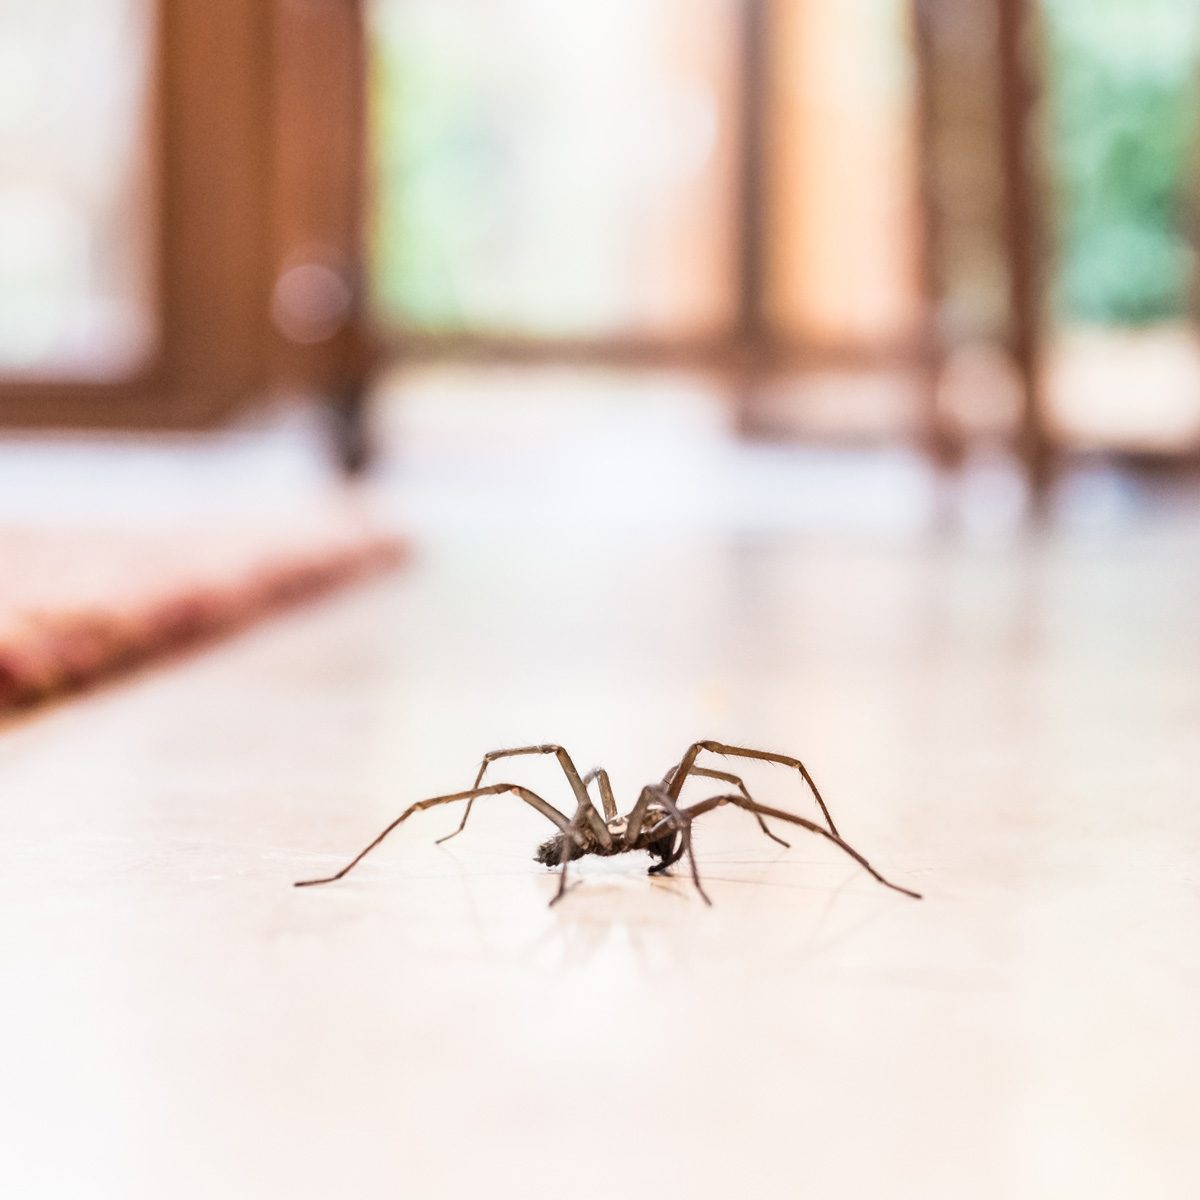 Here's Why You Should Never Kill A Spider